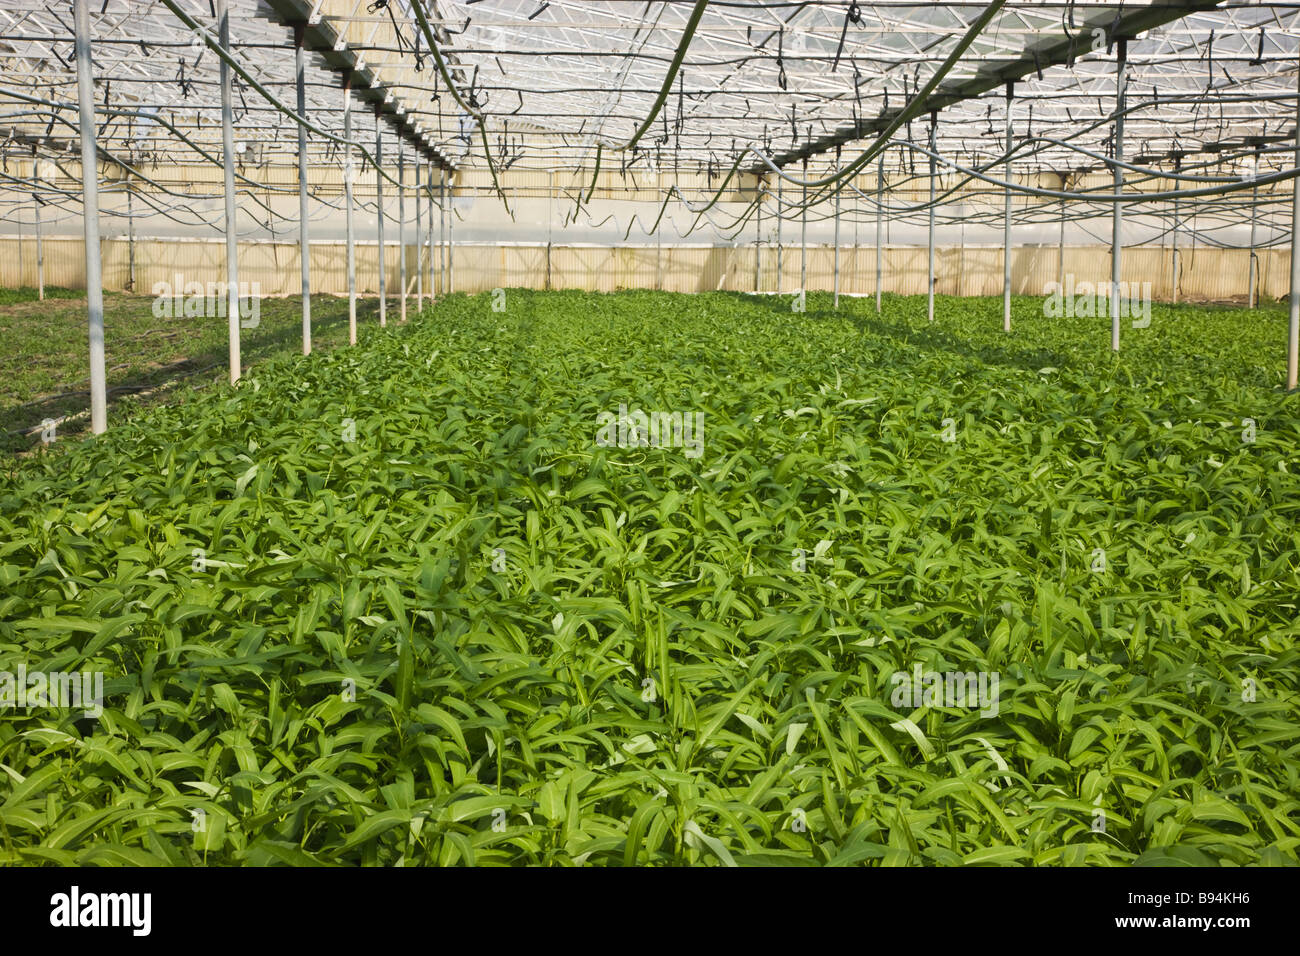 Ong choy Chinese Water Spinach growing in greenhouse. Stock Photo